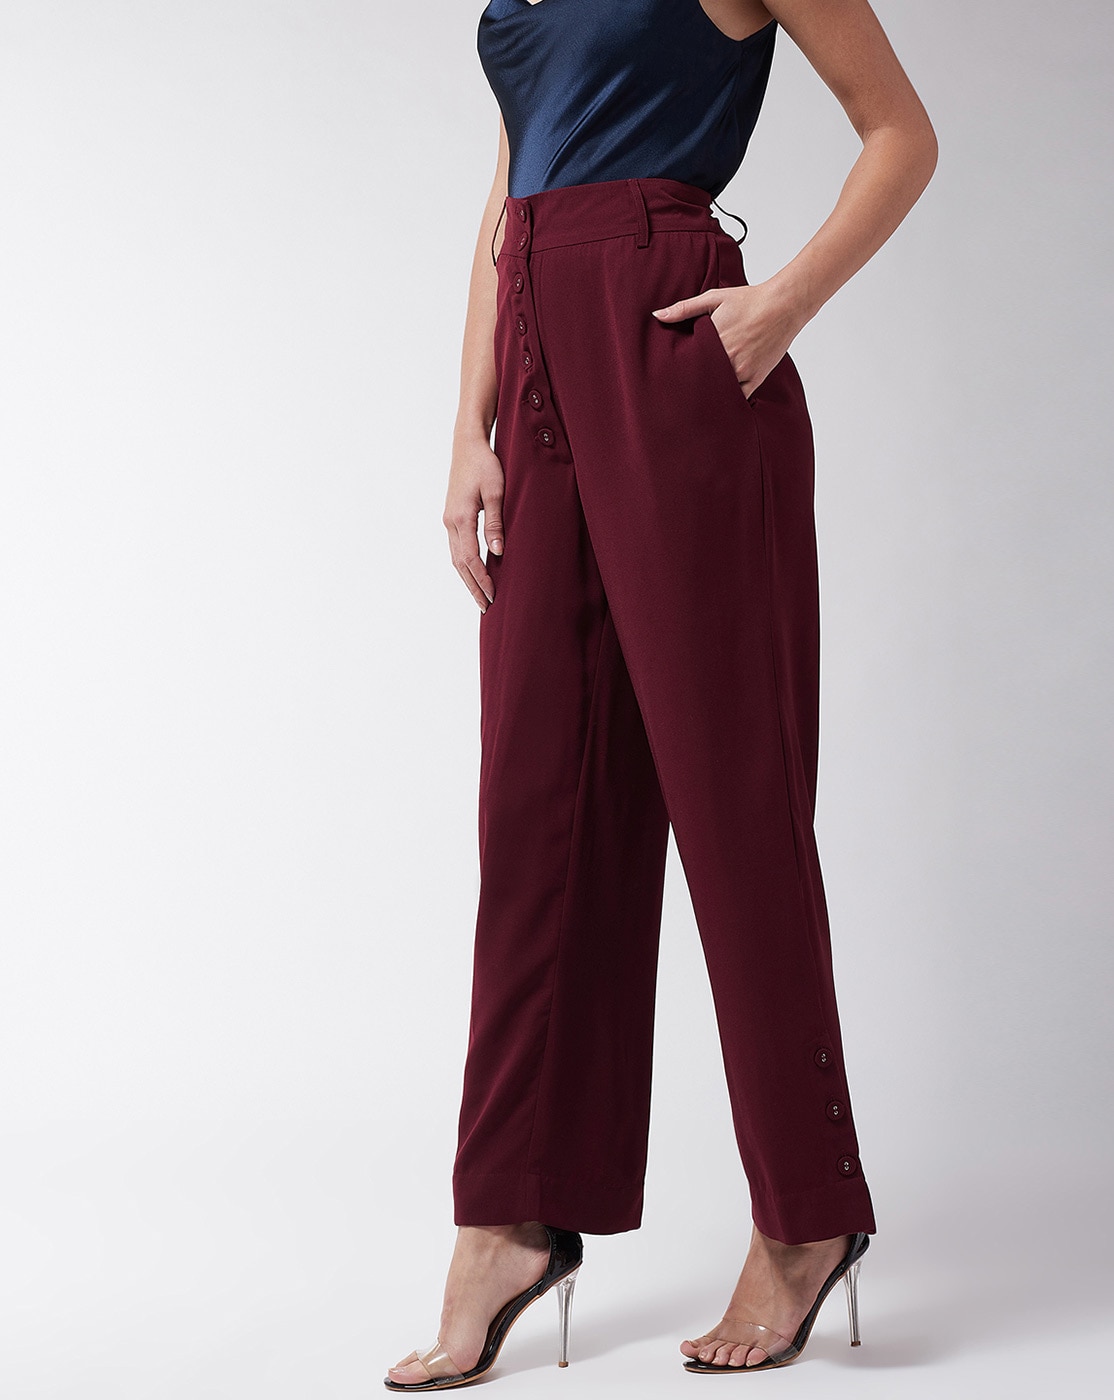 Burgundy Bliss Women Cotton Pants casual and semi formal daily trousers